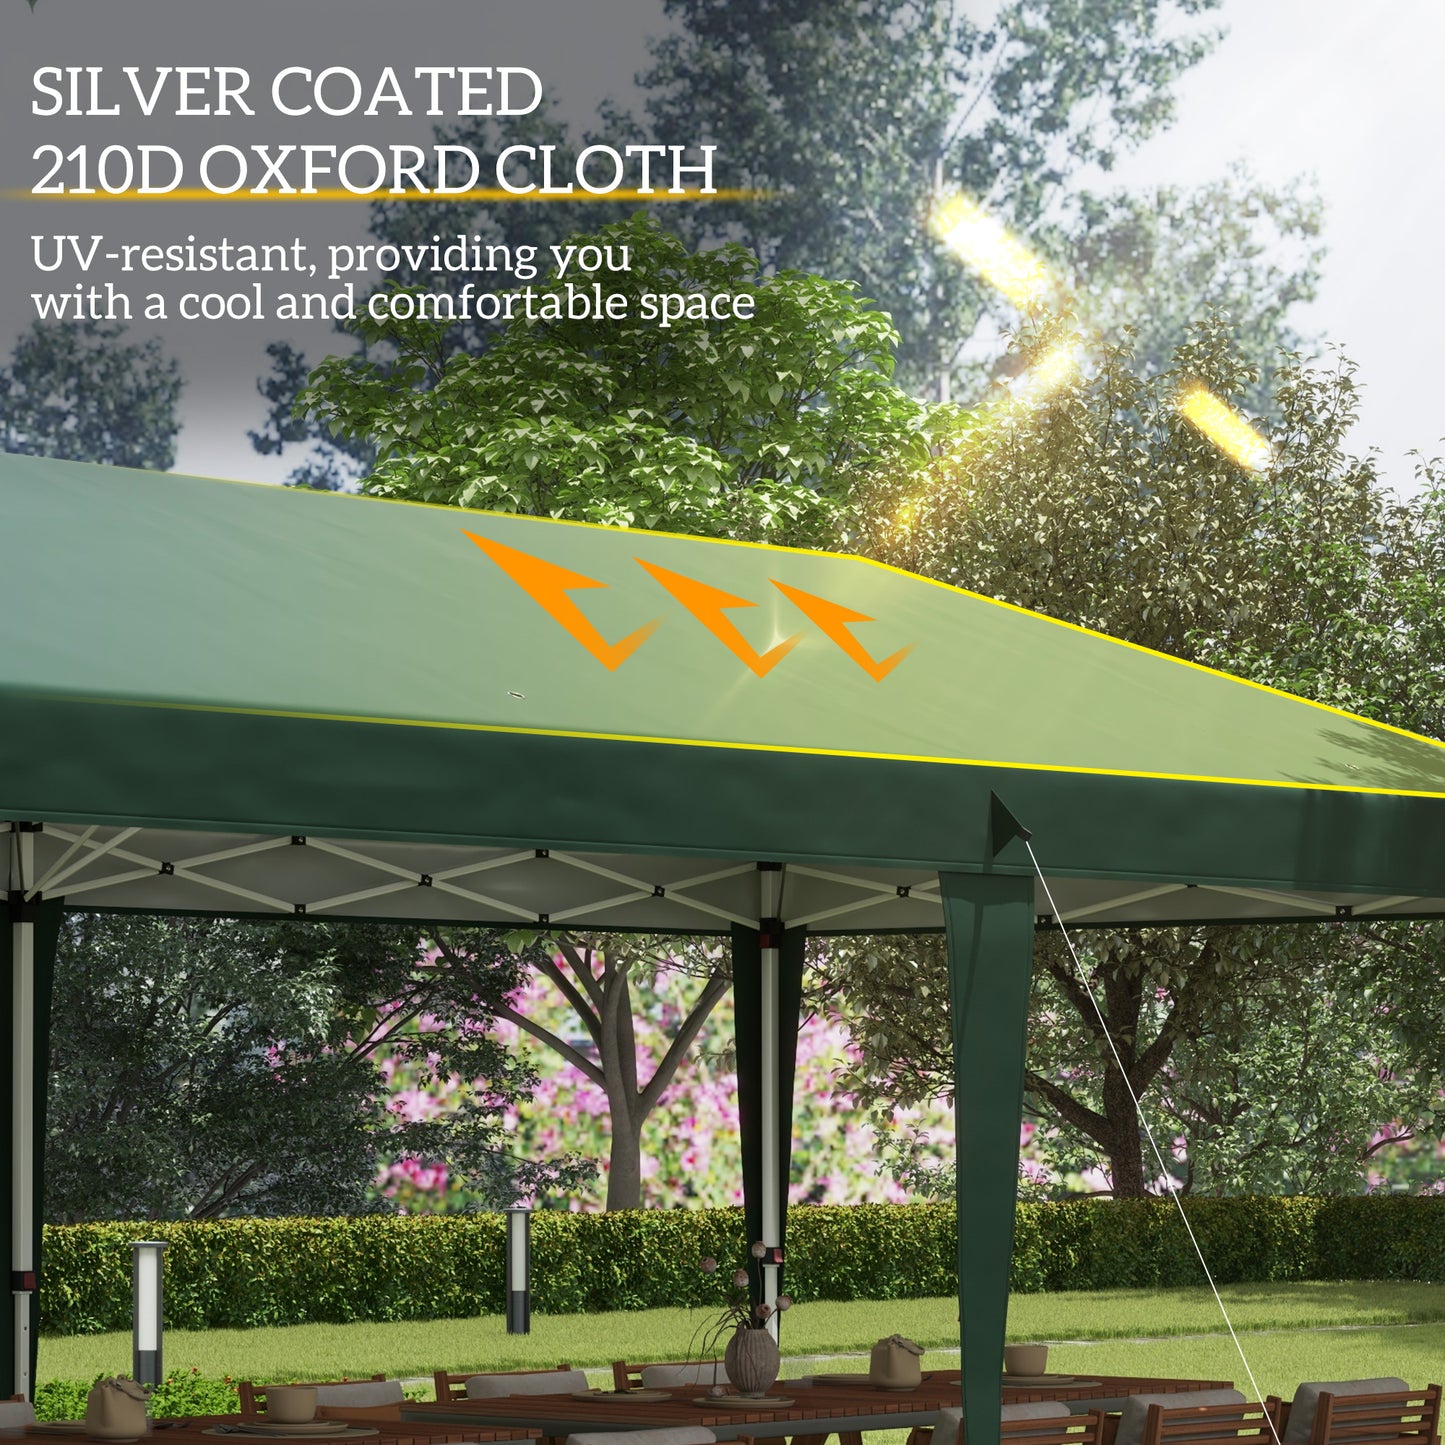 Outsunny Pop Up Gazebo with Double Roof, Foldable Wedding Canopy Tent with Carrying Bag, 6 m x 3 m x 2.65 m, Green